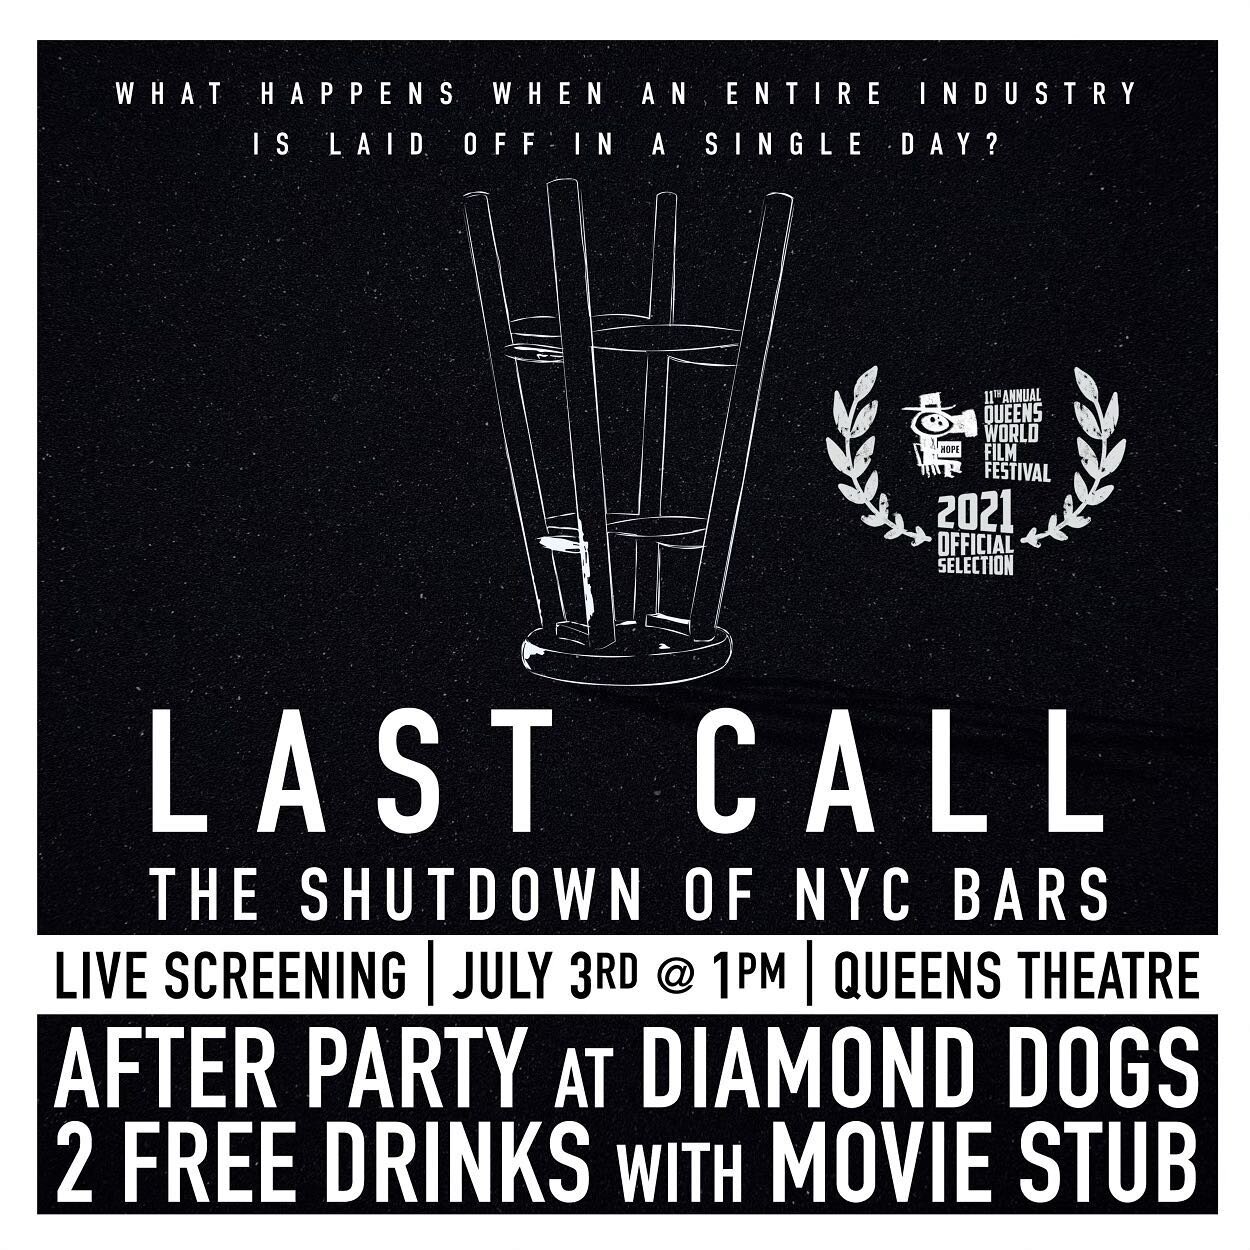 Come see the film this Saturday at the @queensworldfilmfest &amp; then join us for drinks at @diamonddogsnyc 🍻 Your first two drinks are free if you can show your movie ticket!!
TIP YOUR BARTENDERS ❤

LINK IN @lastcalldocumentary BIO
TO BUY TICKETS 